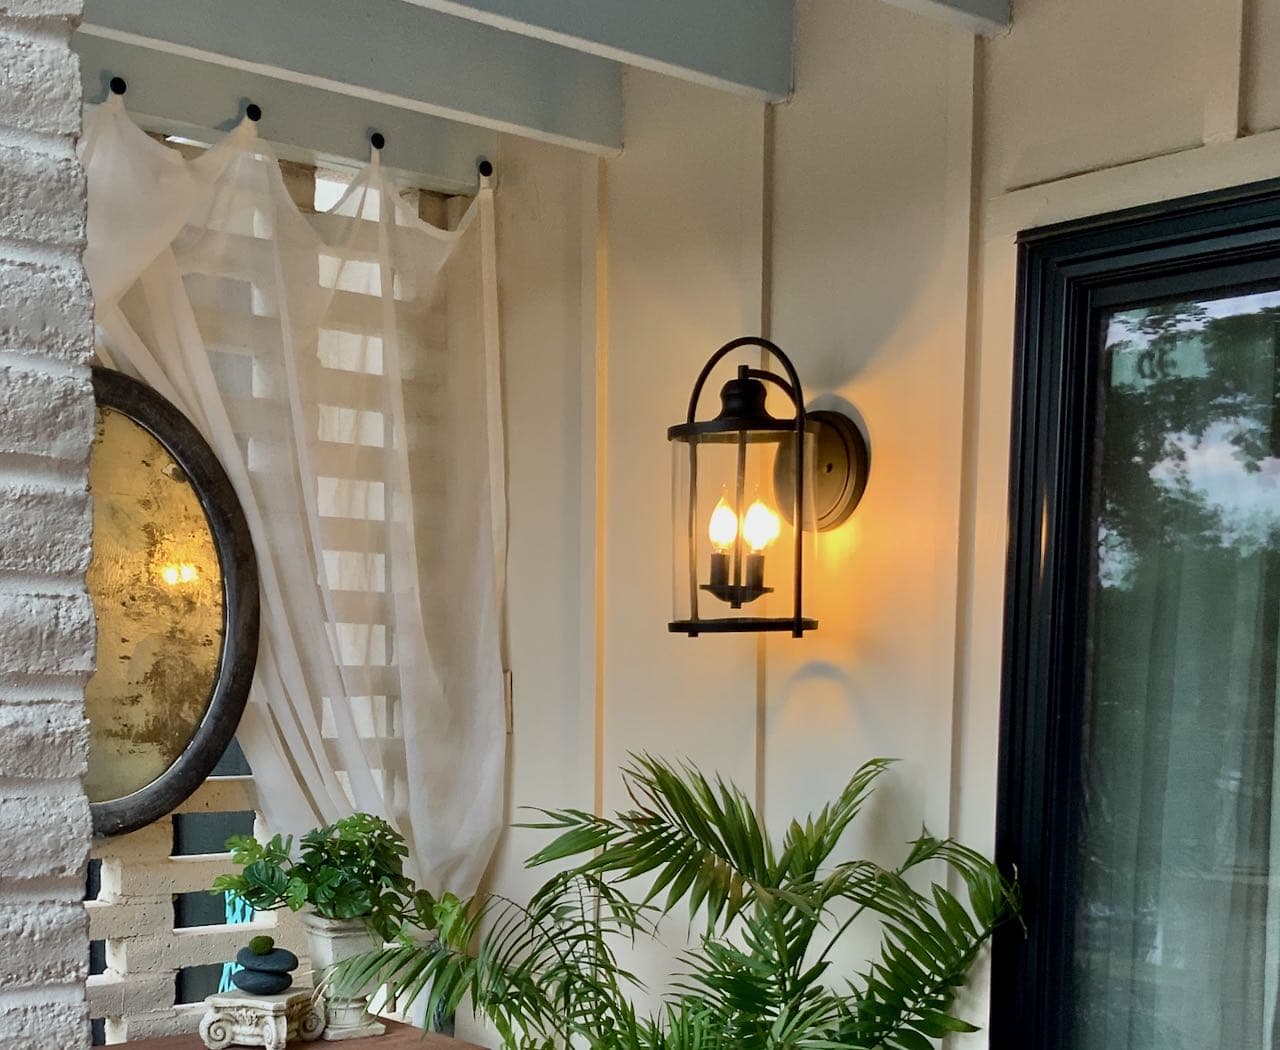 Modern Lantern light fixture on wall and reflected in mirror with palm below